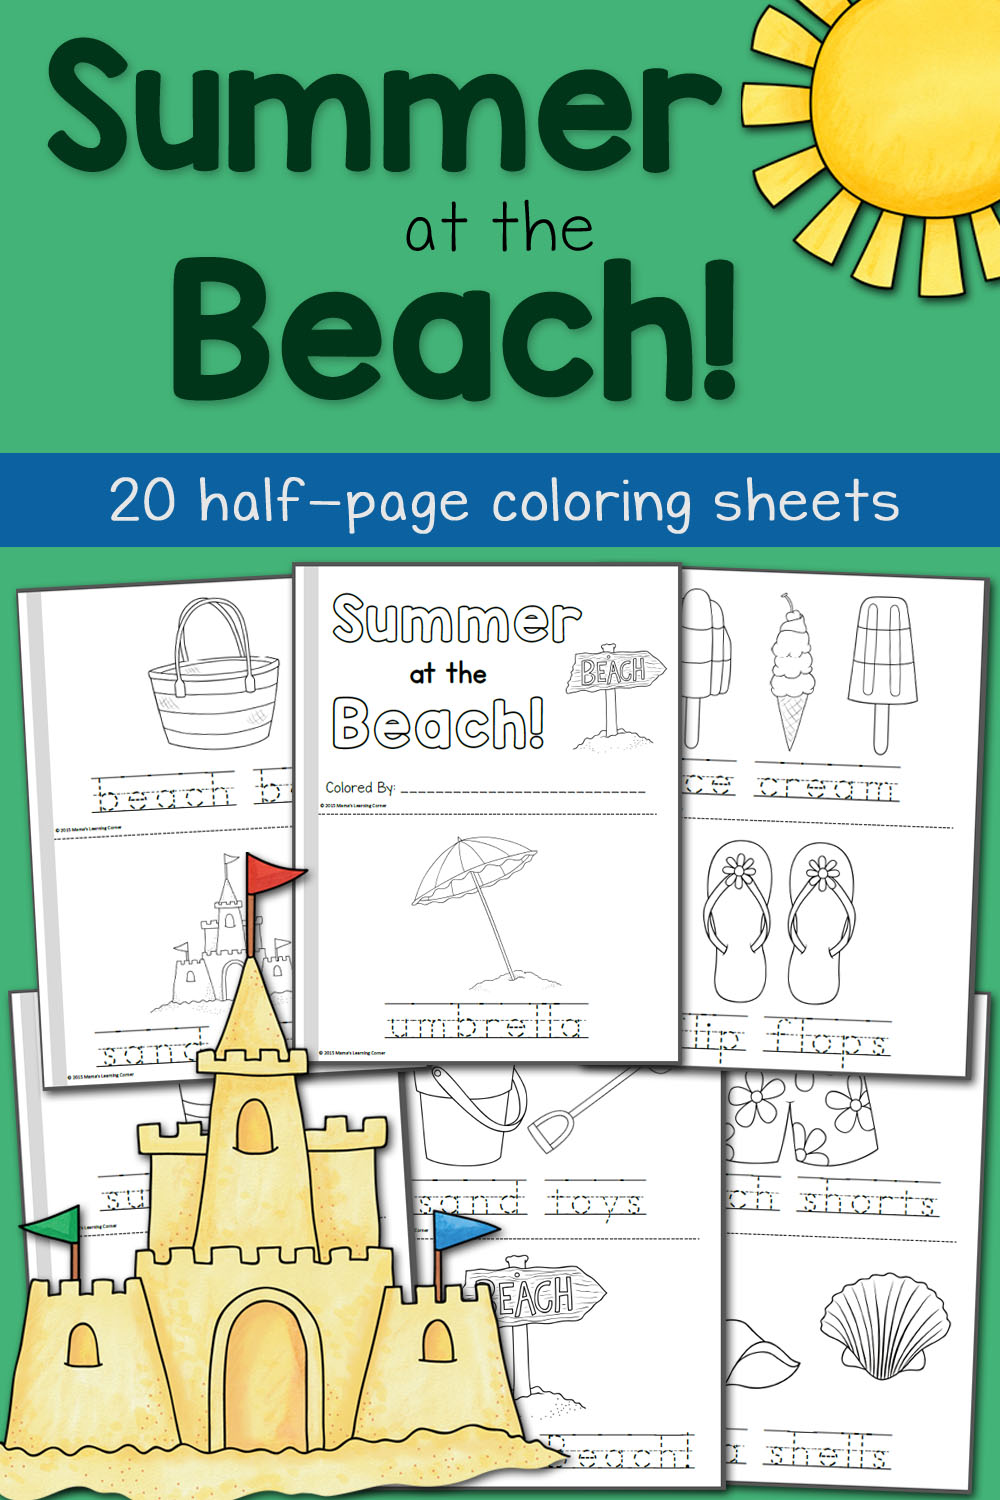 Summer Coloring Pages: At the Beach!